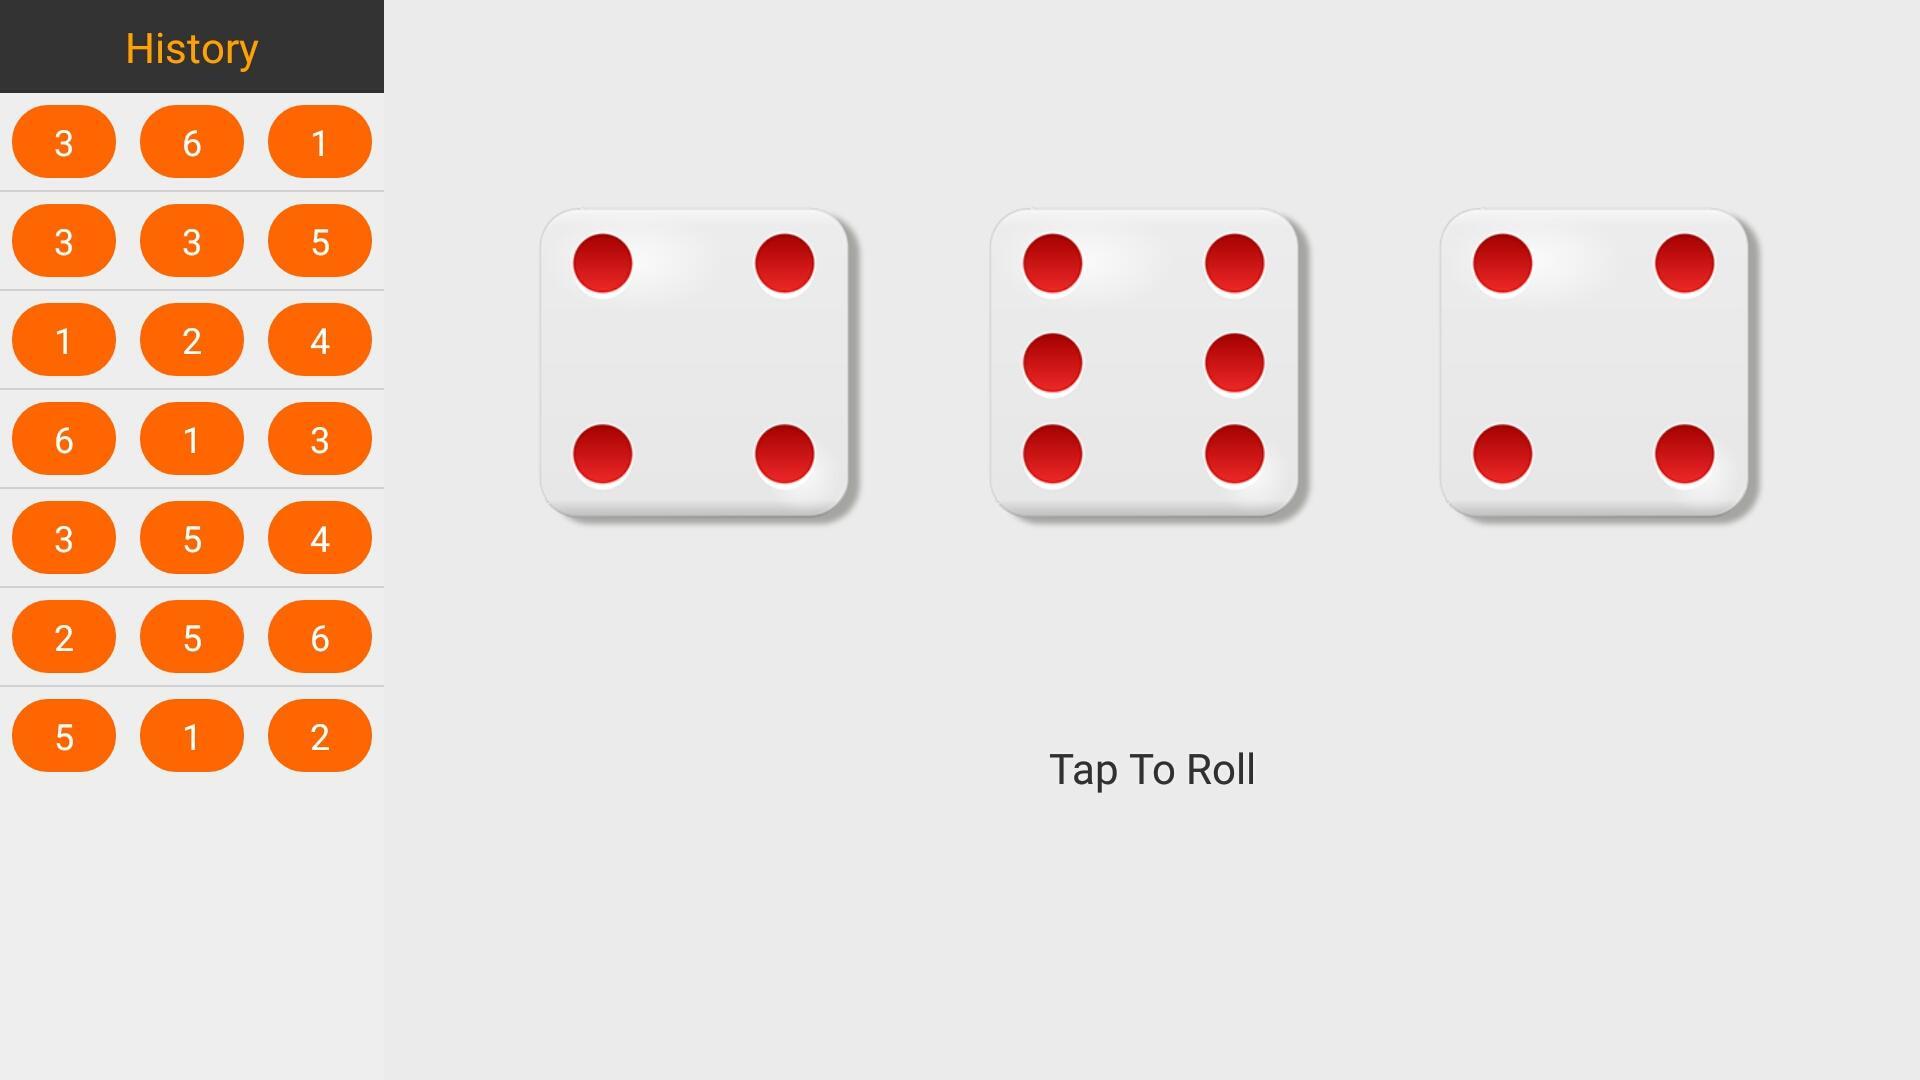 Dice Roller for Android - APK Download